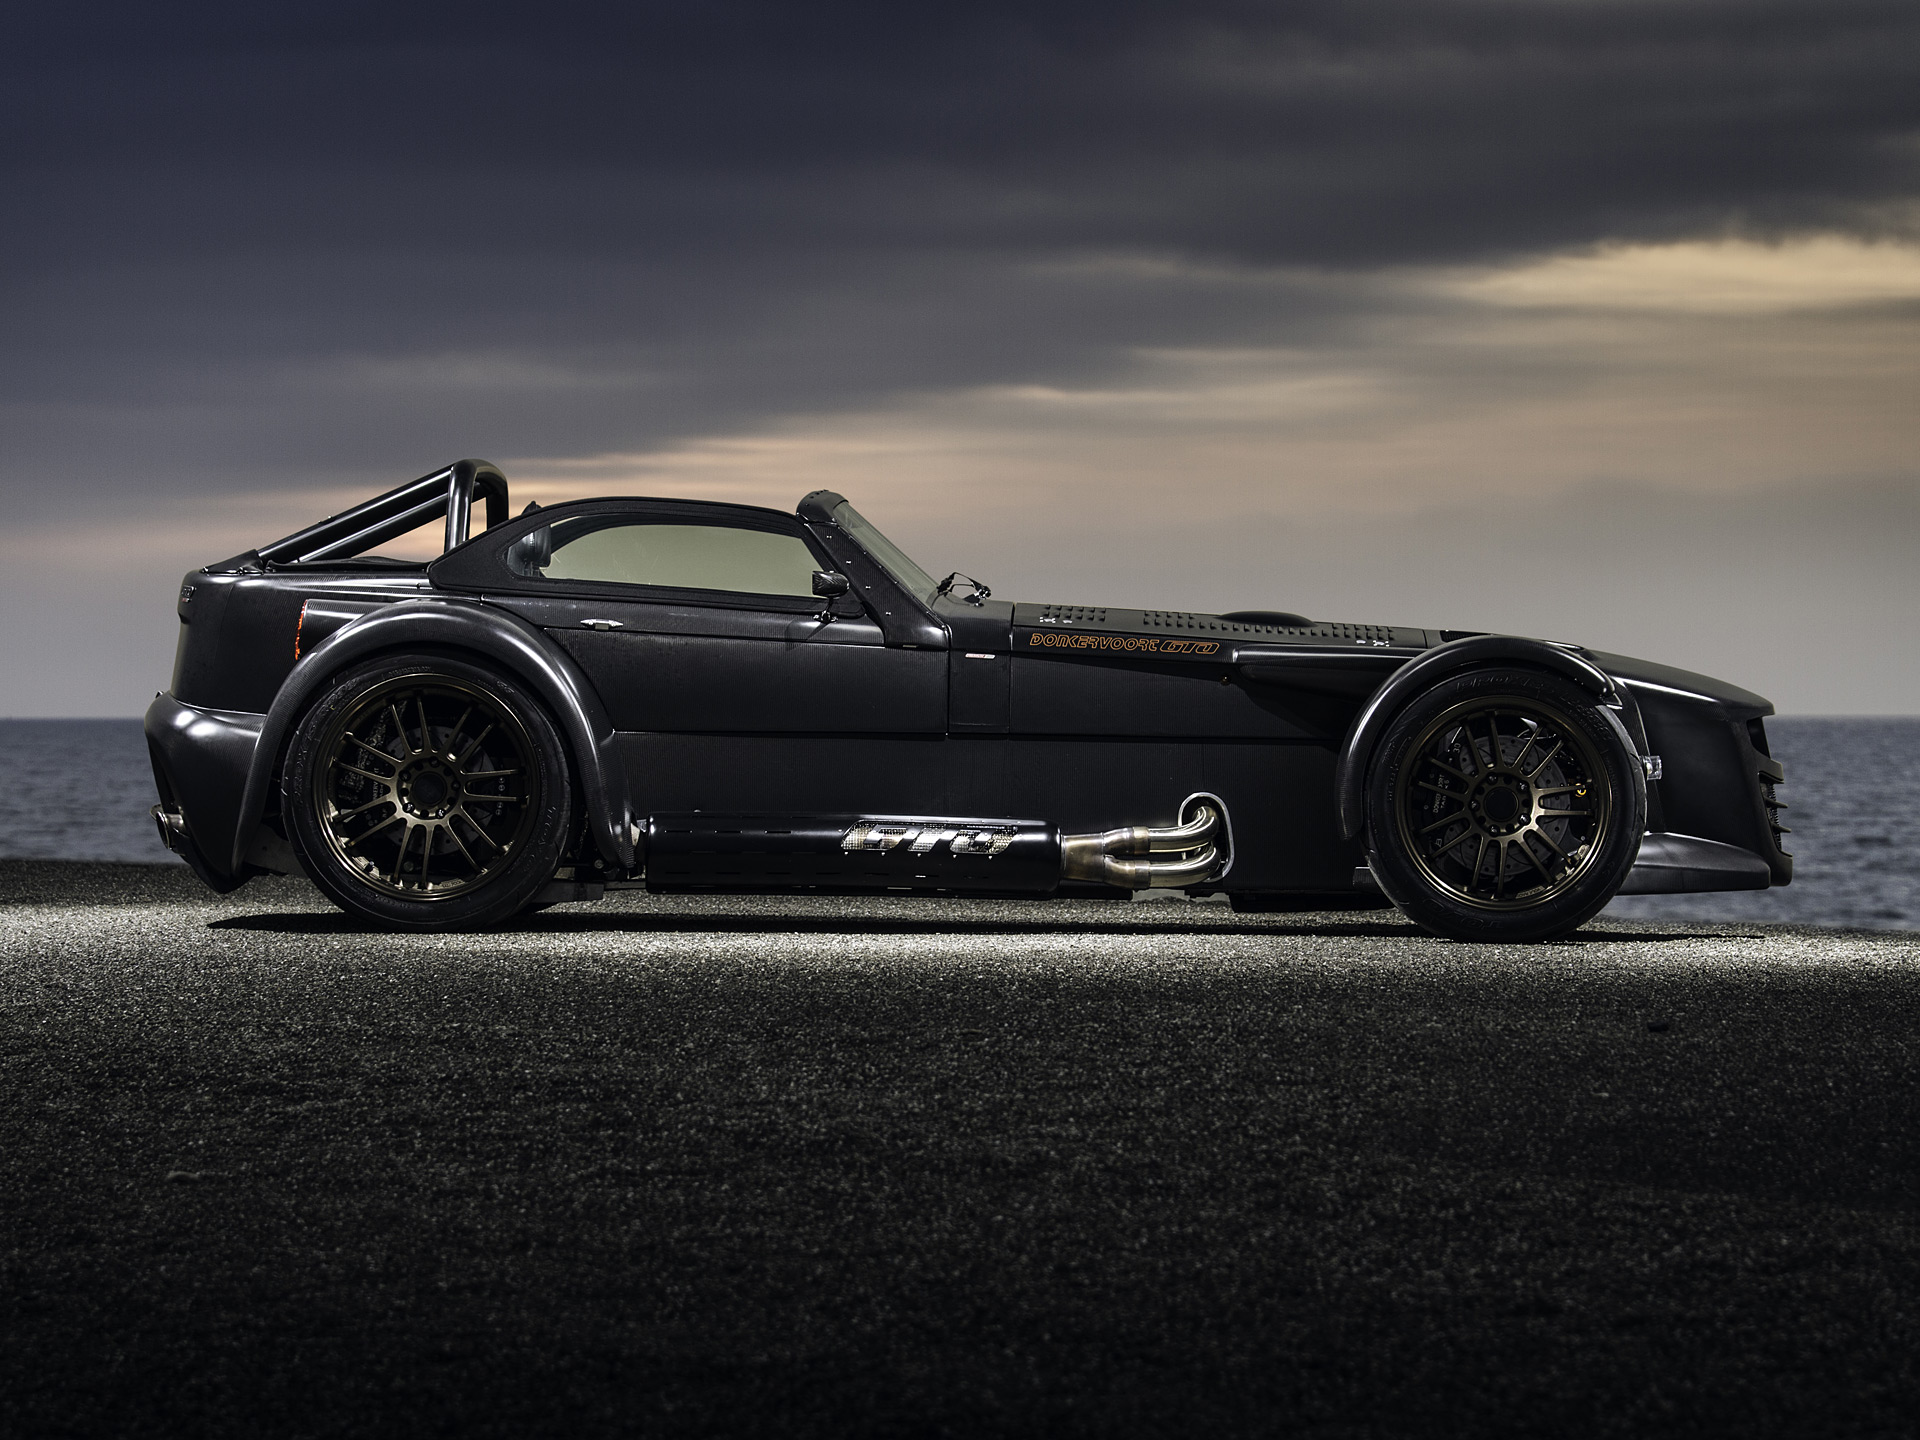  2015 Donkervoort D8 GTO Bare Naked Carbon Edition Wallpaper.